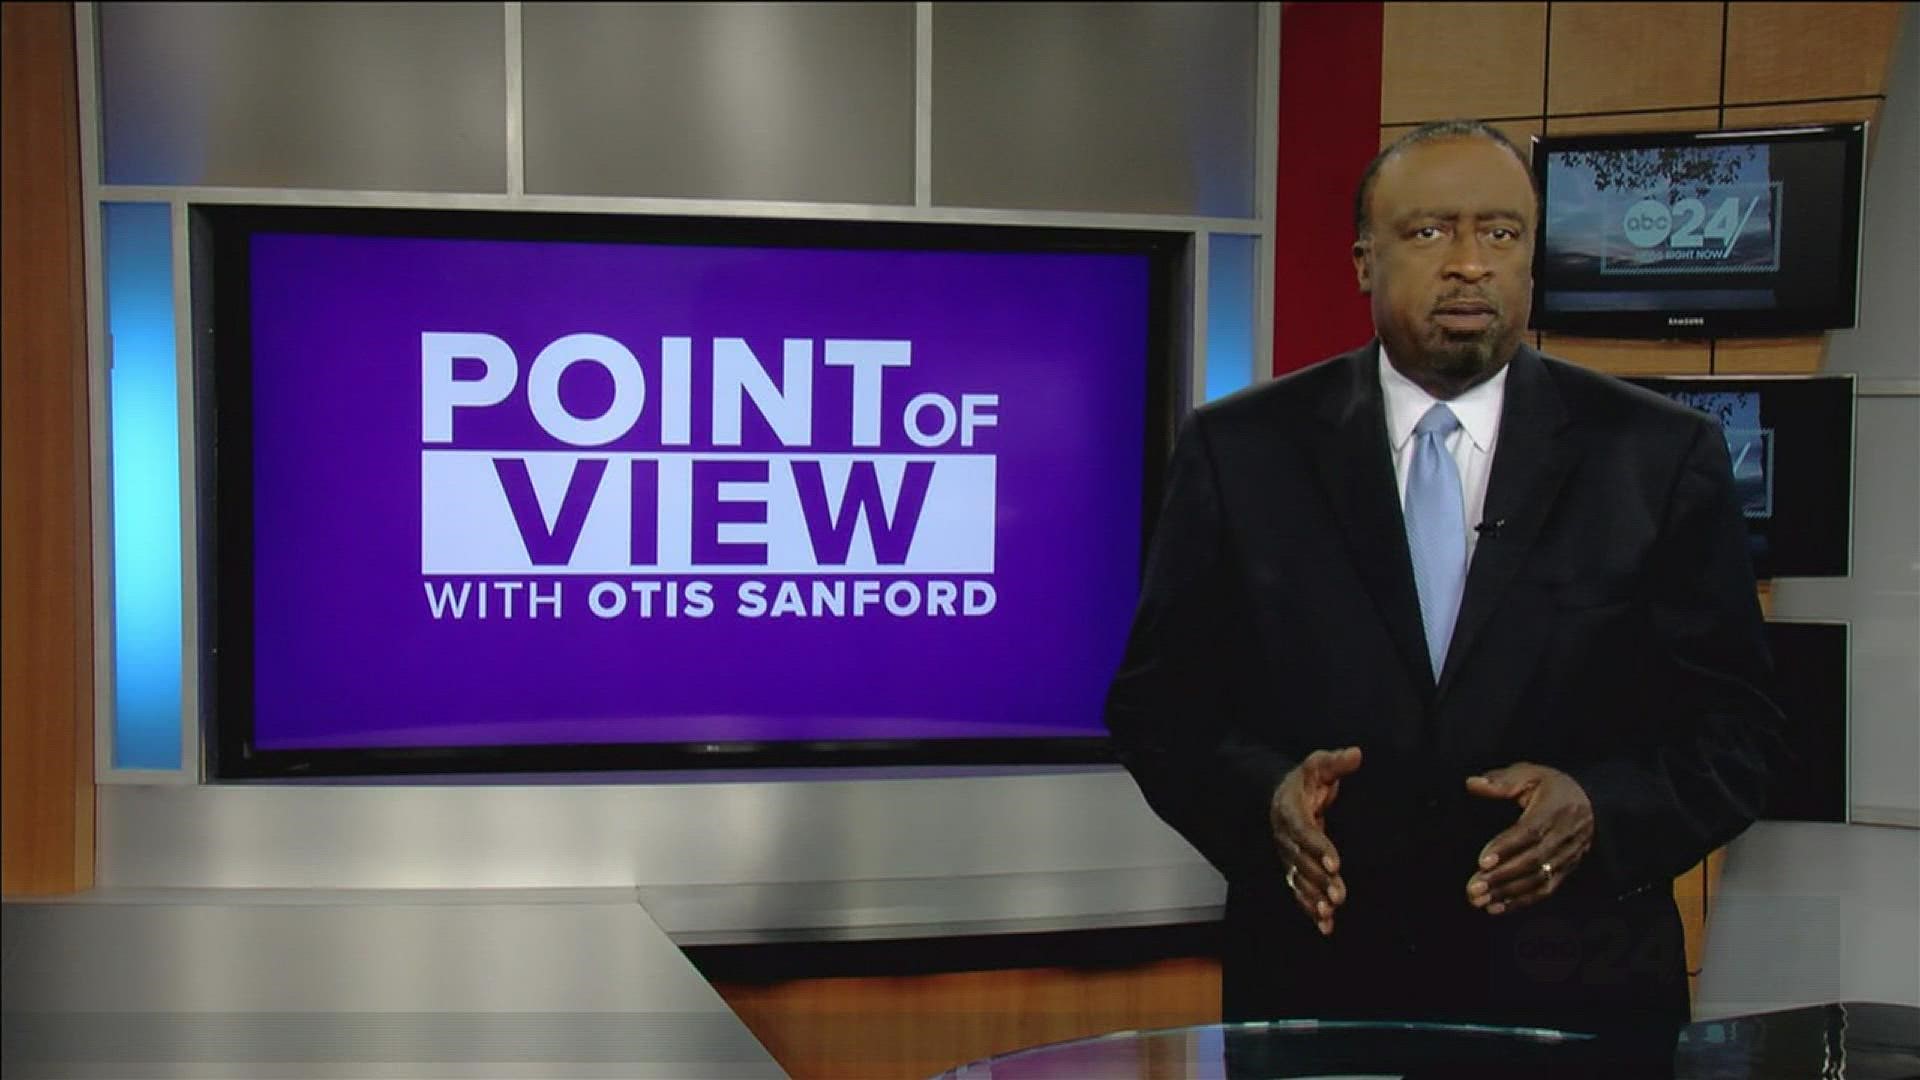 Political analyst and commentator Otis Sanford shared his Point of View on Tennessee lawmakers’ passage of incentives for Ford Motor Company.